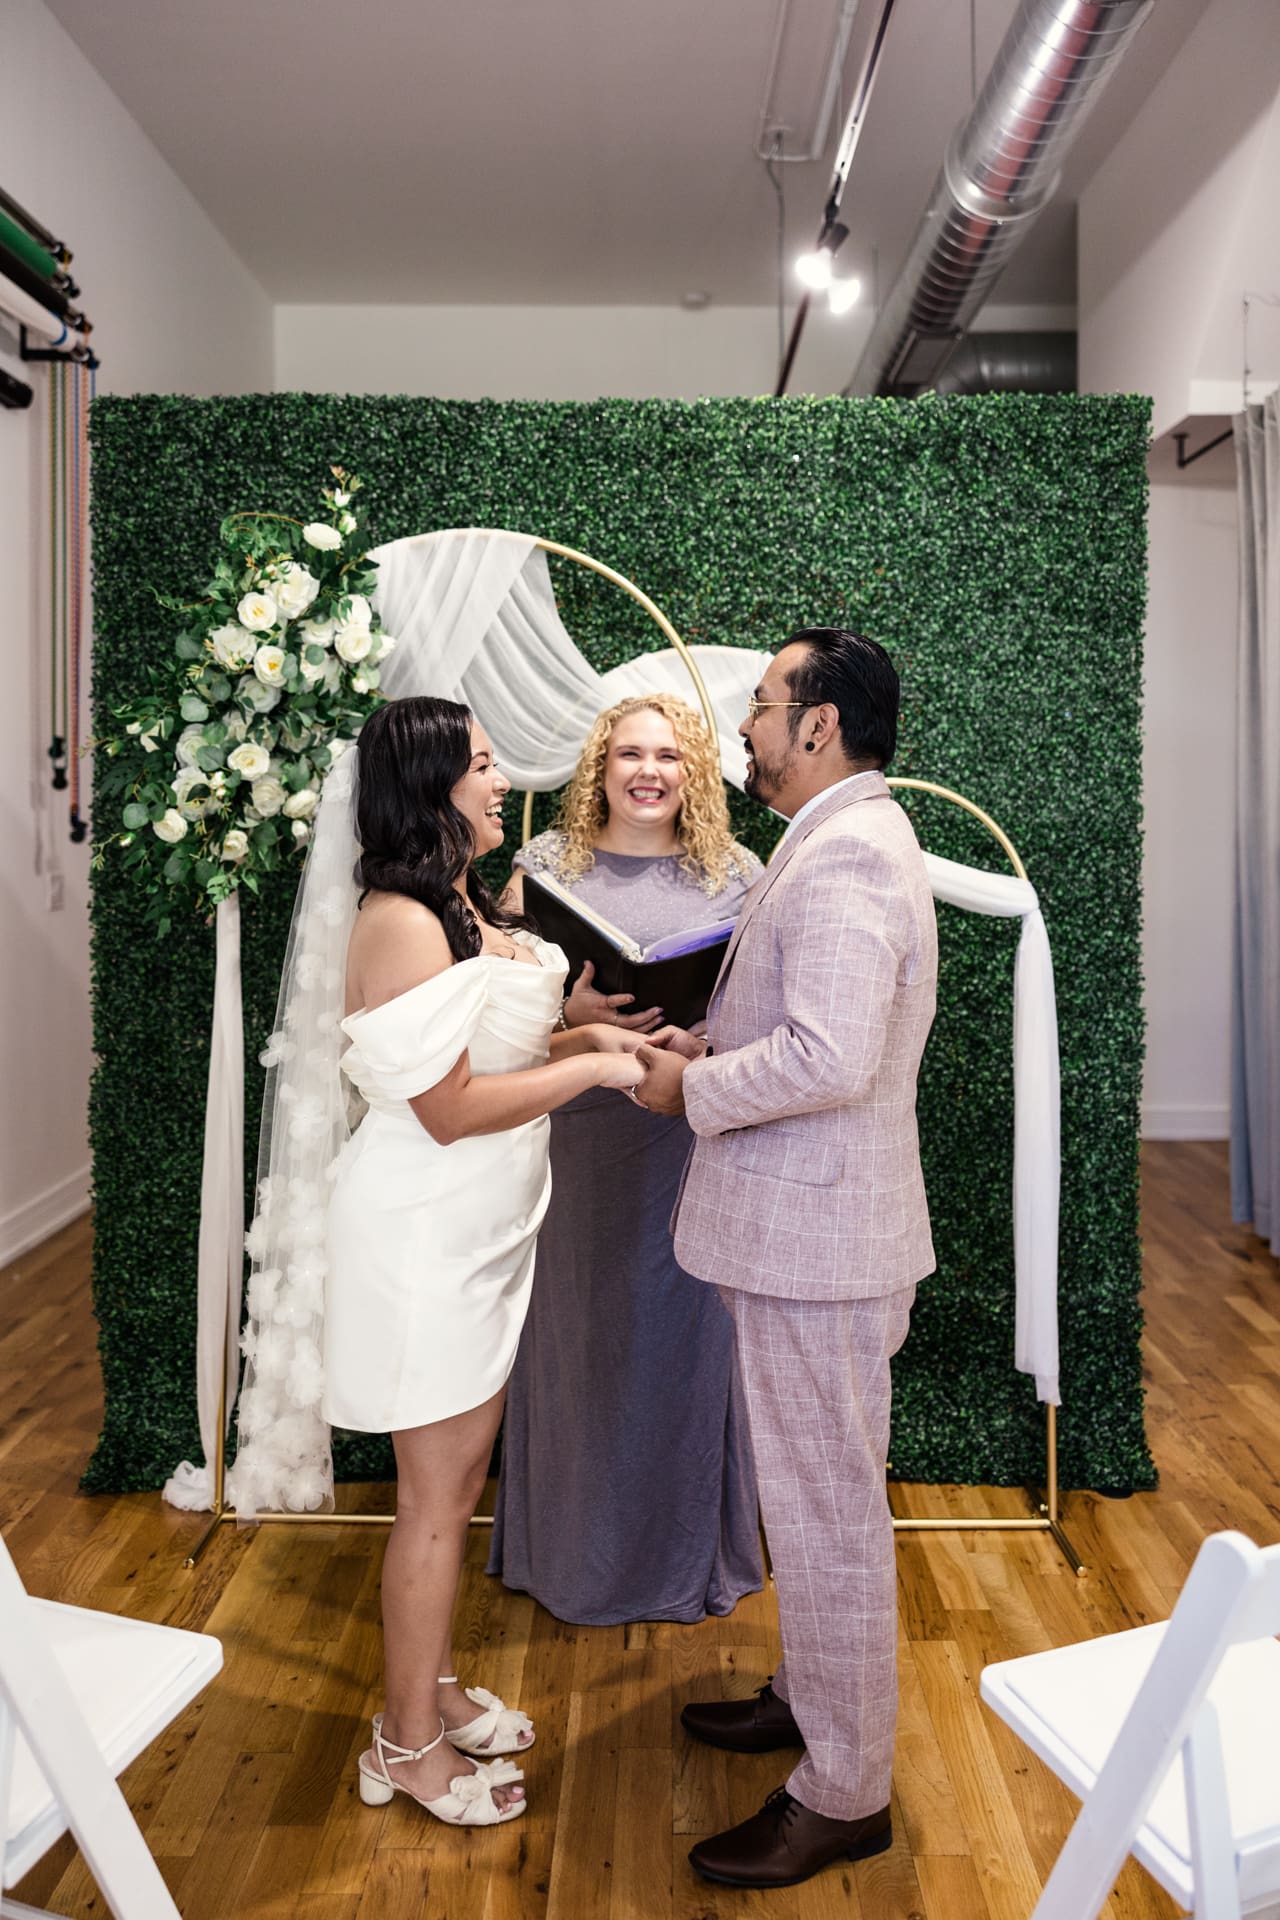 Intimate wedding ceremony in front of greenery wall with white floral decor at Chicago event space P&M Studio